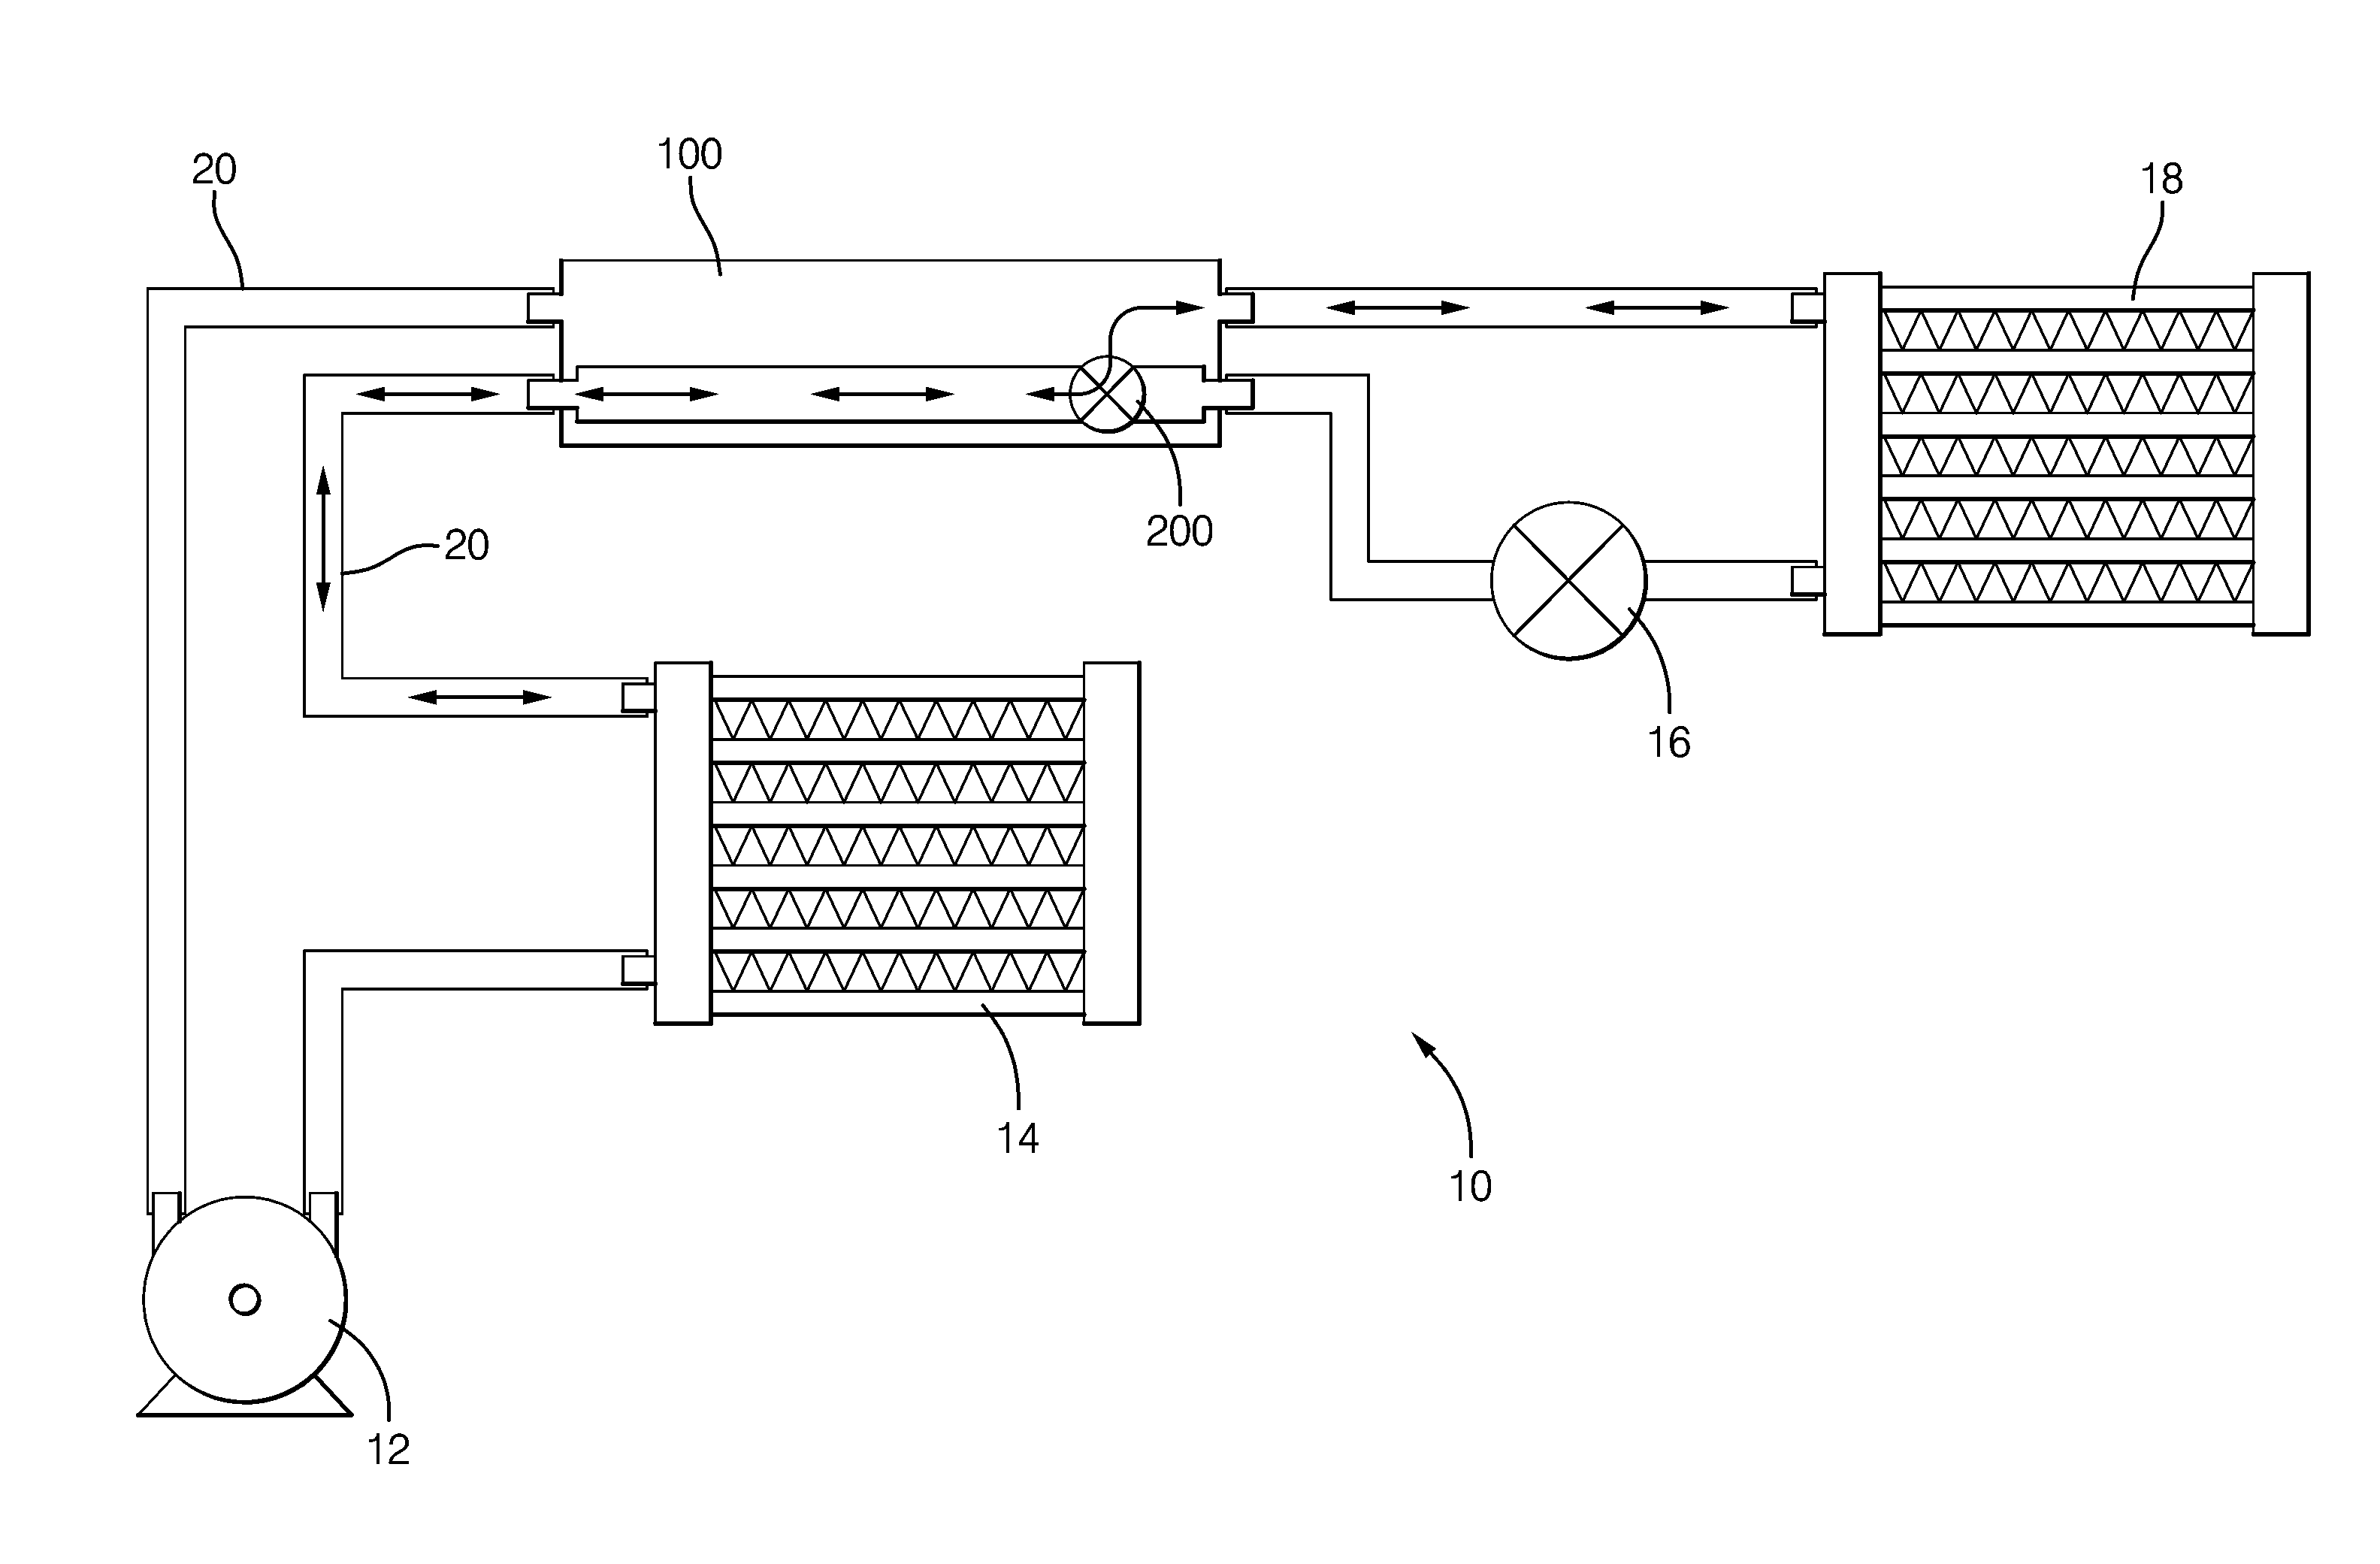 Air conditioning system having an improved internal heat exchanger